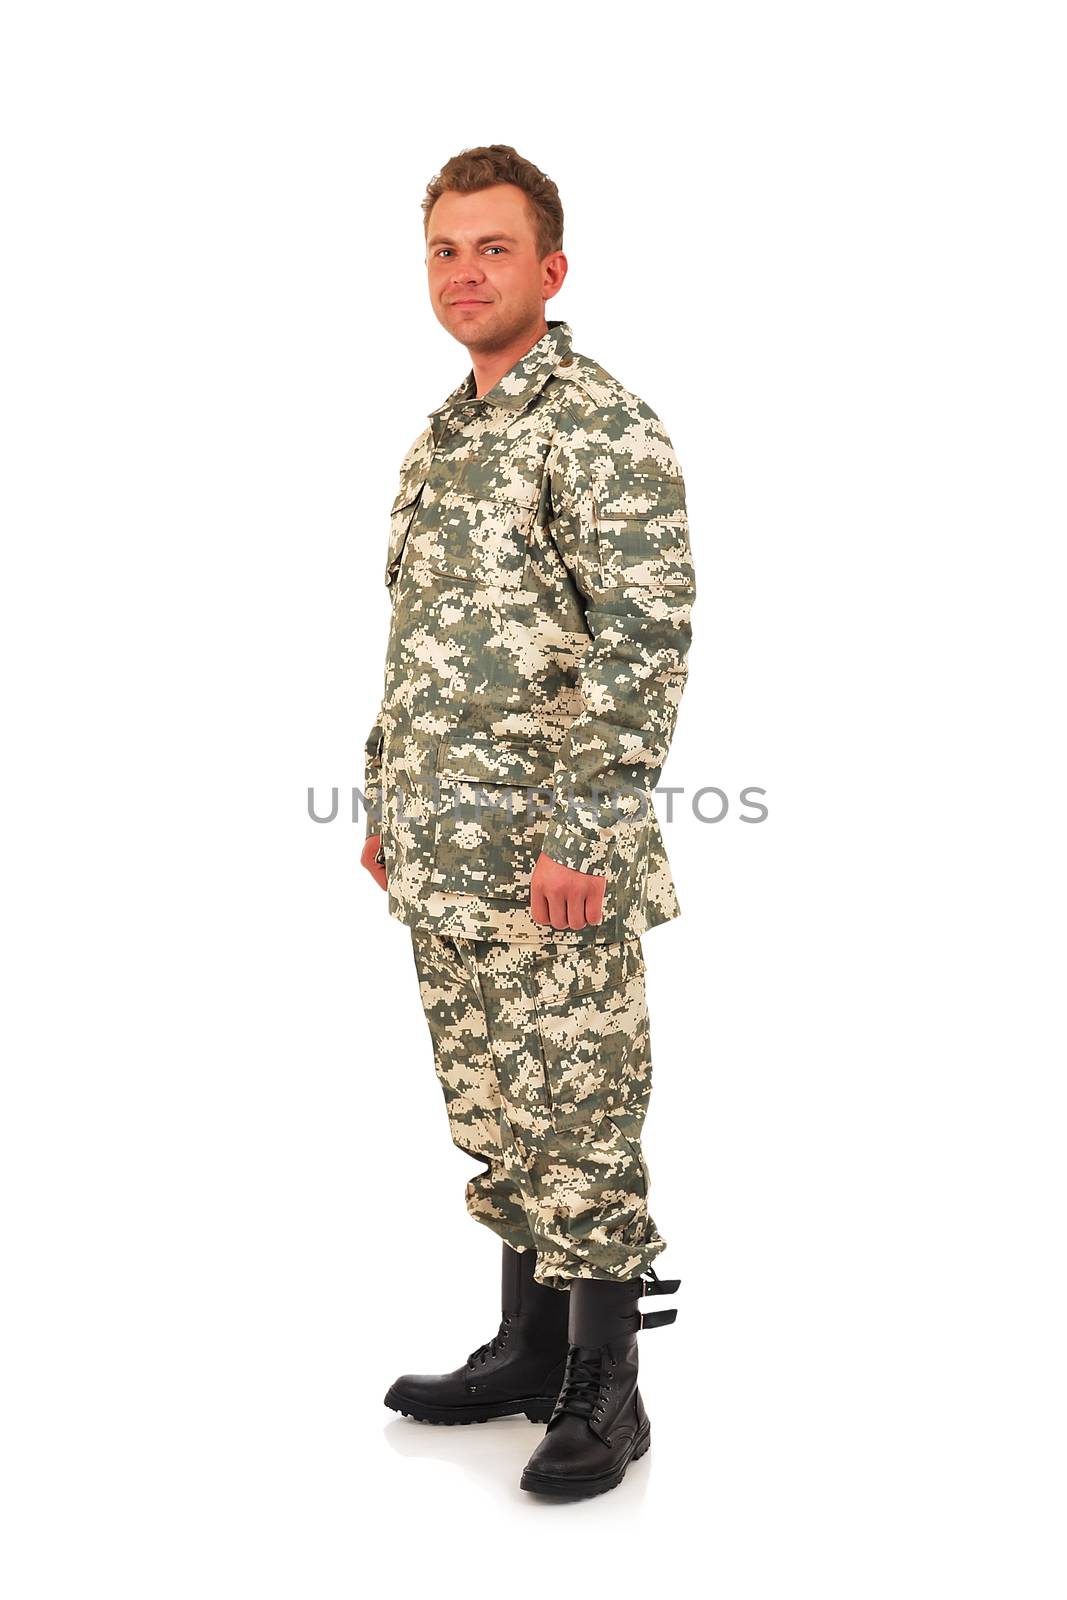 Military Man isolated on white